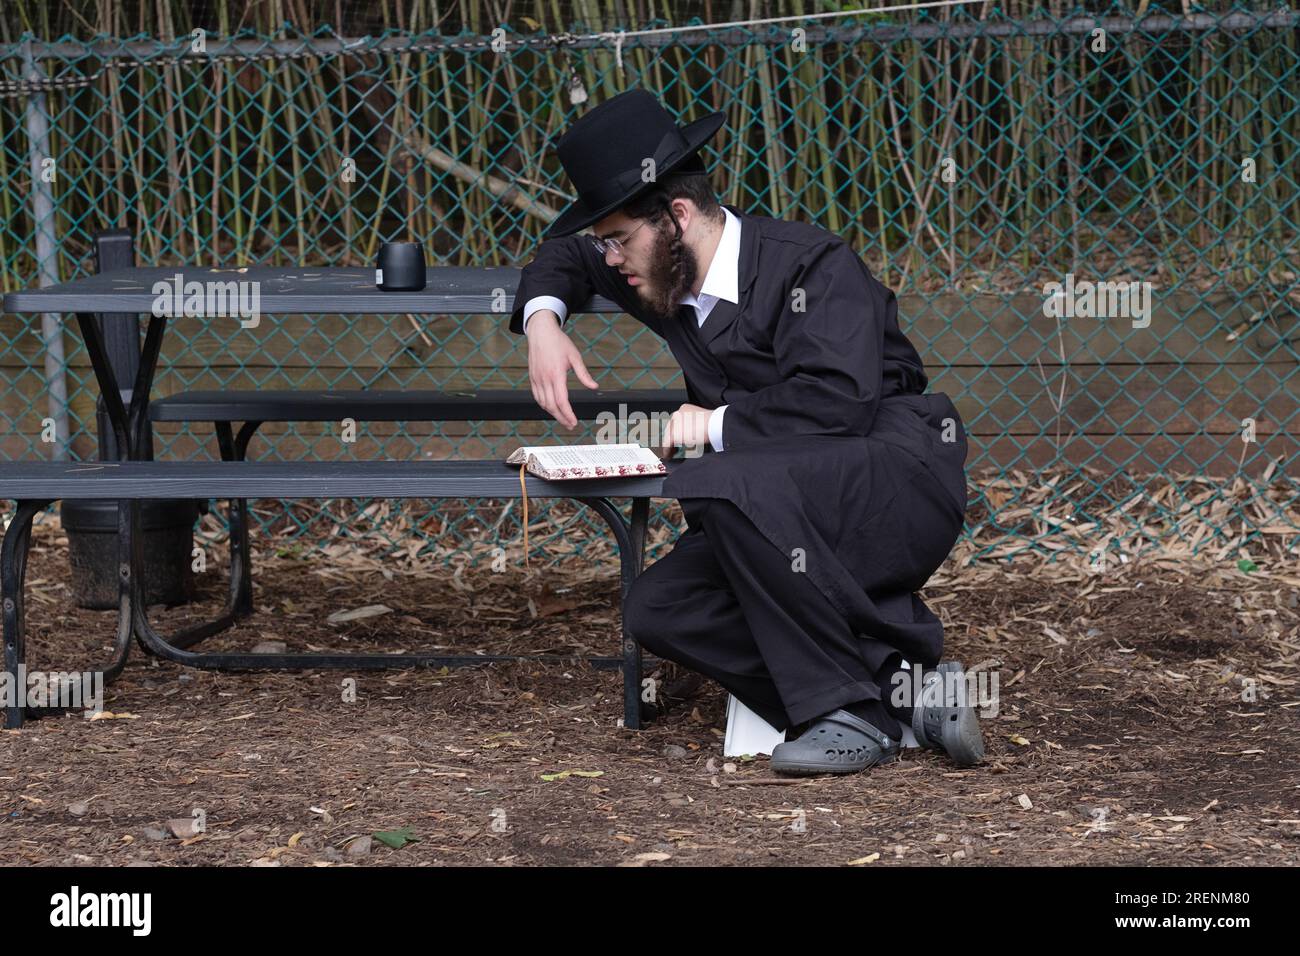 At Tish B'Av morning services, an orthodox Jewish man prays outdoors alone on a low seat commensurate with the mourning laws for the day. In New York. Stock Photo